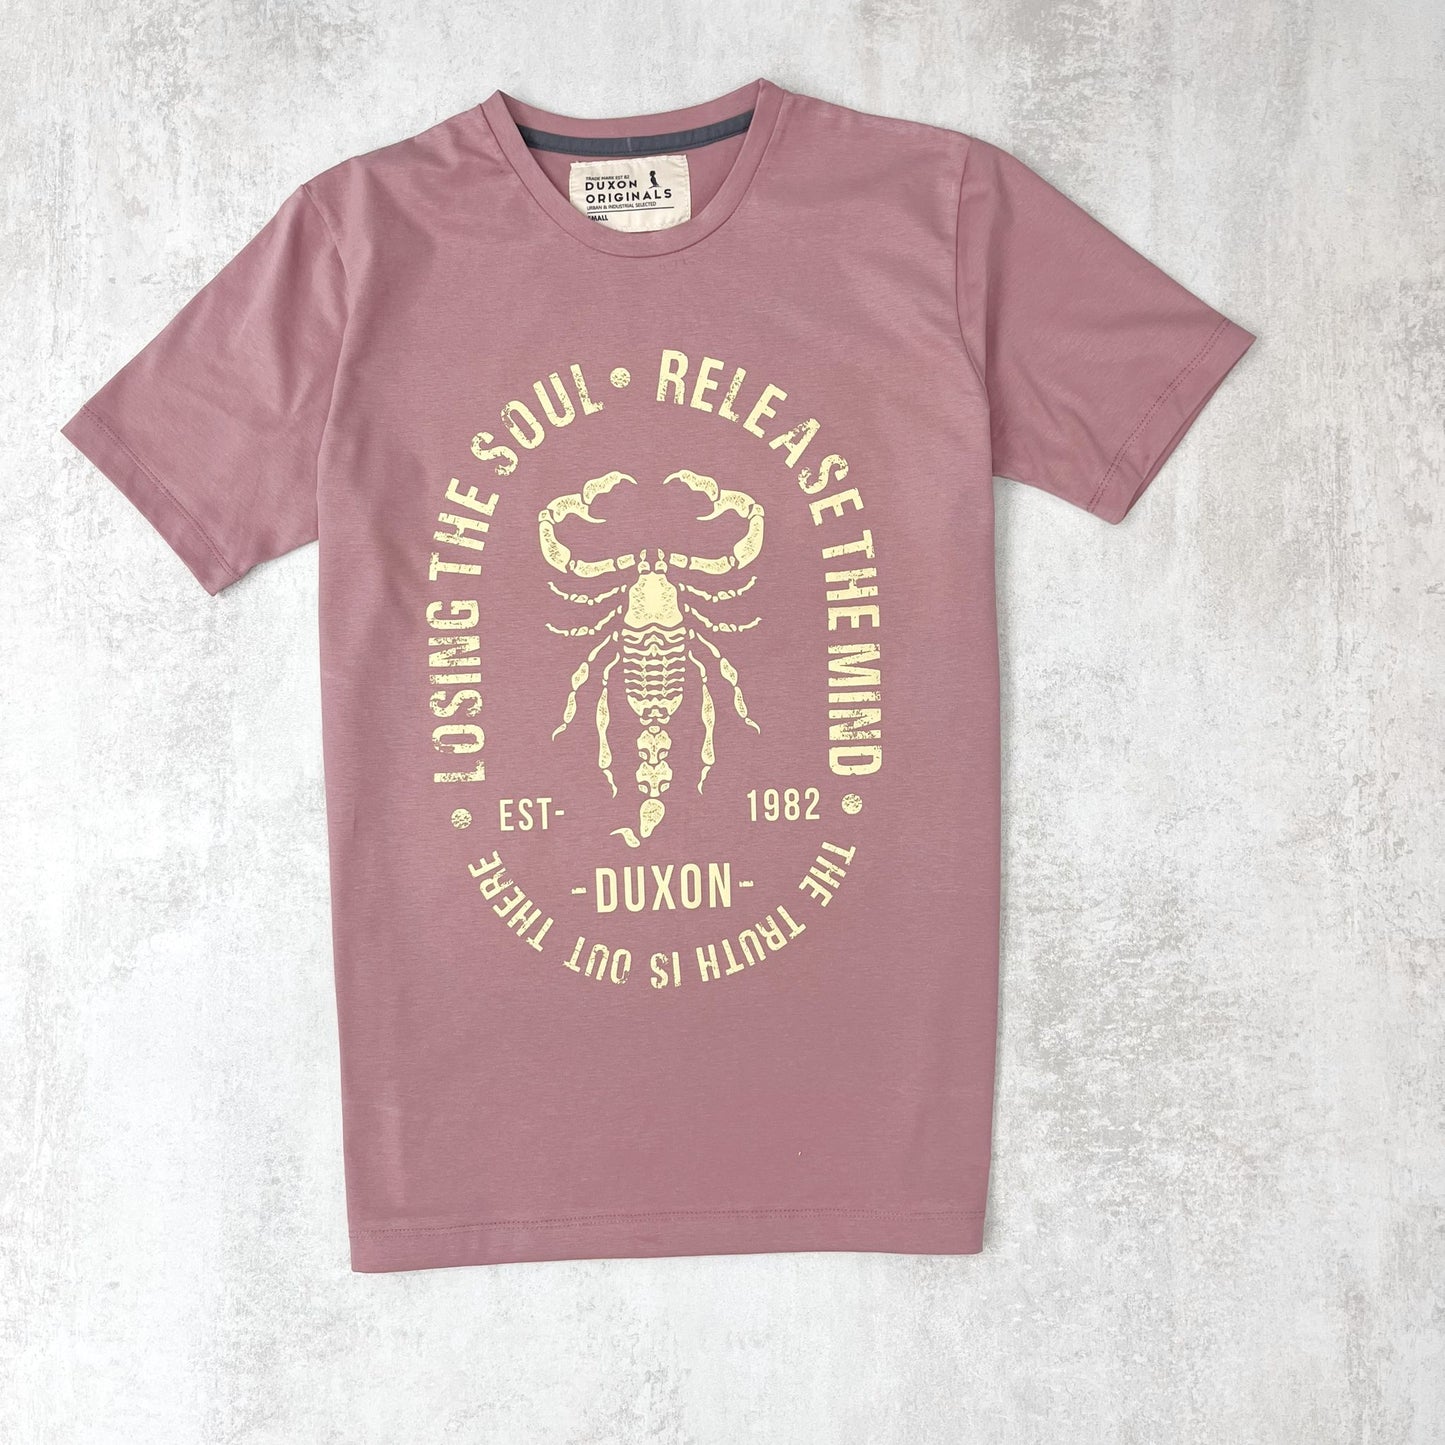 REMERA "LOSING THE SOUL, RELEASE THE MIND" COLOR ROSA VIEJO